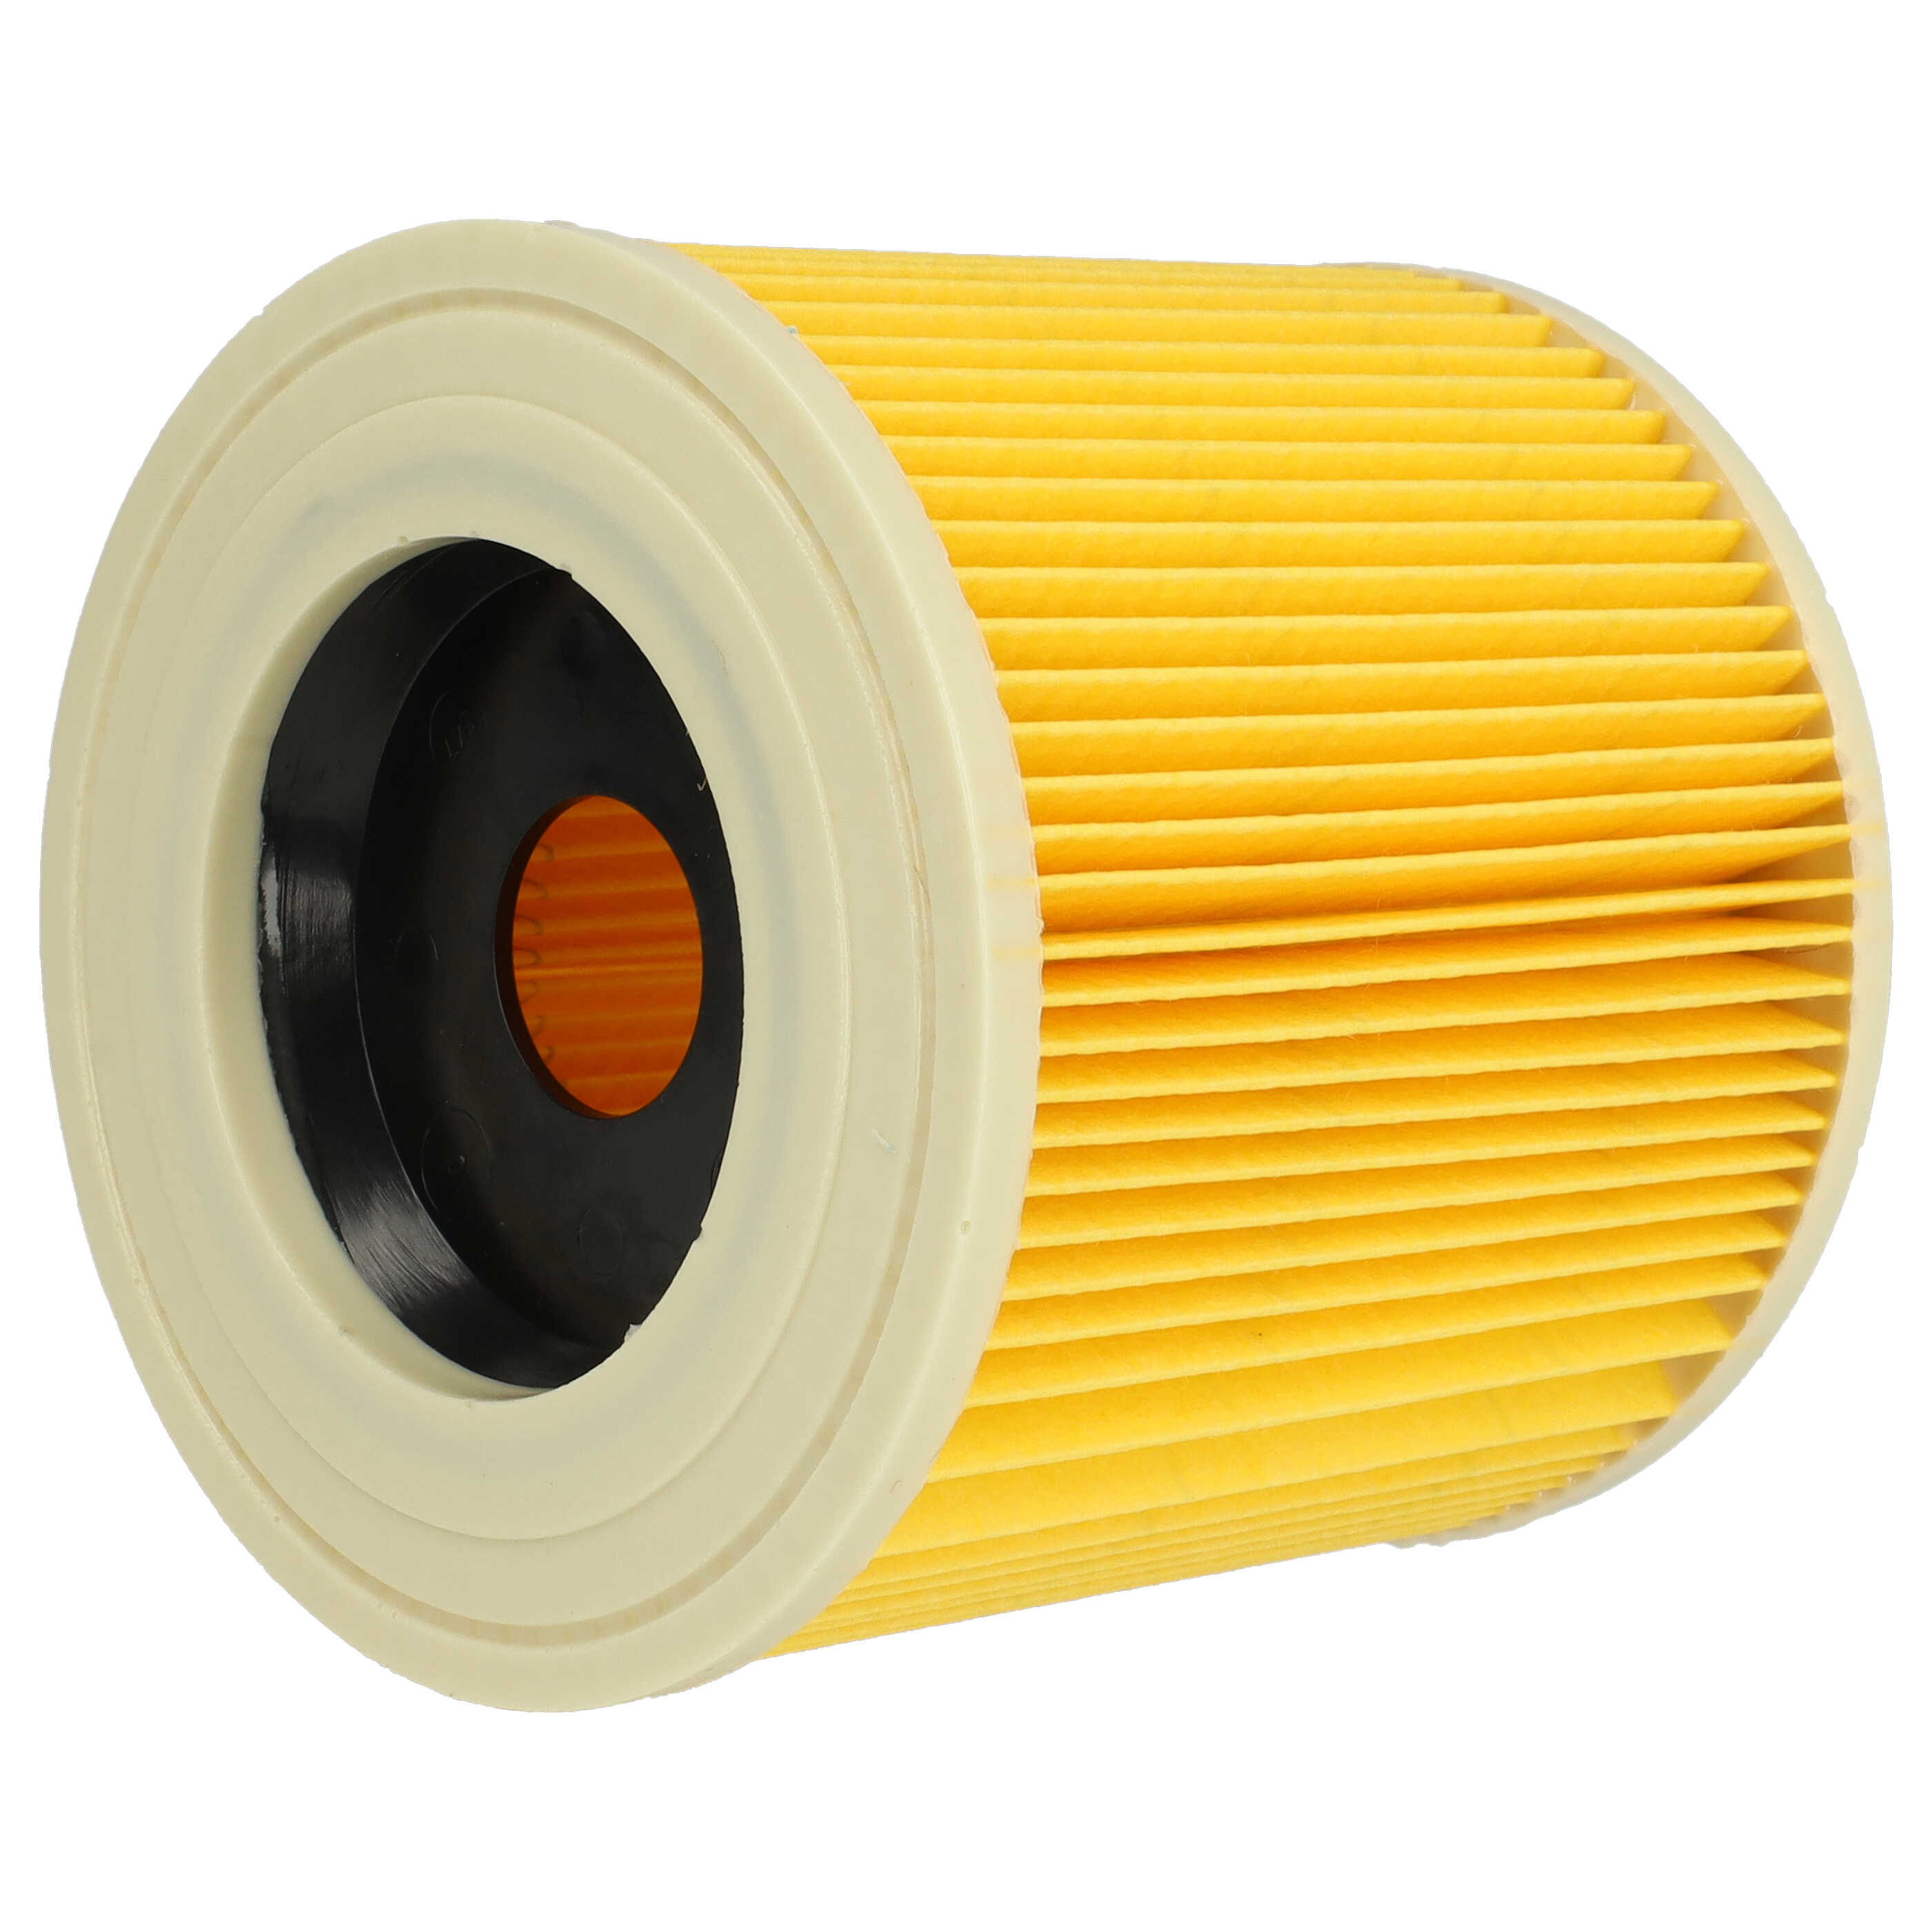 3x cartridge filter replaces Kärcher 2.863-303.0, 6.414-552.0, 6.414-547.0 for Baier Vacuum Cleaner, yellow